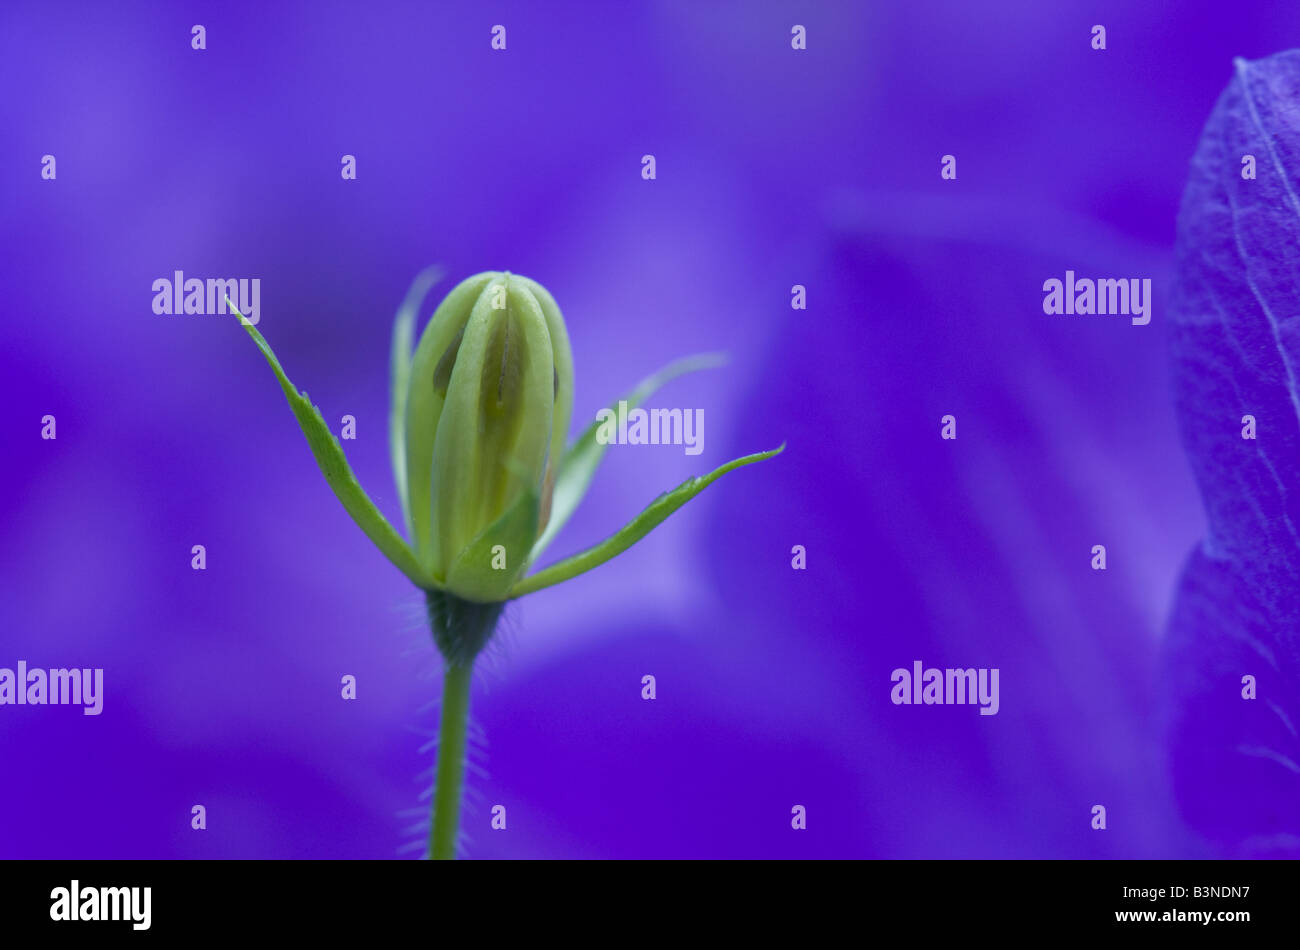 Macro image of a Campanula bud in a field of open campanula flowers. Stock Photo